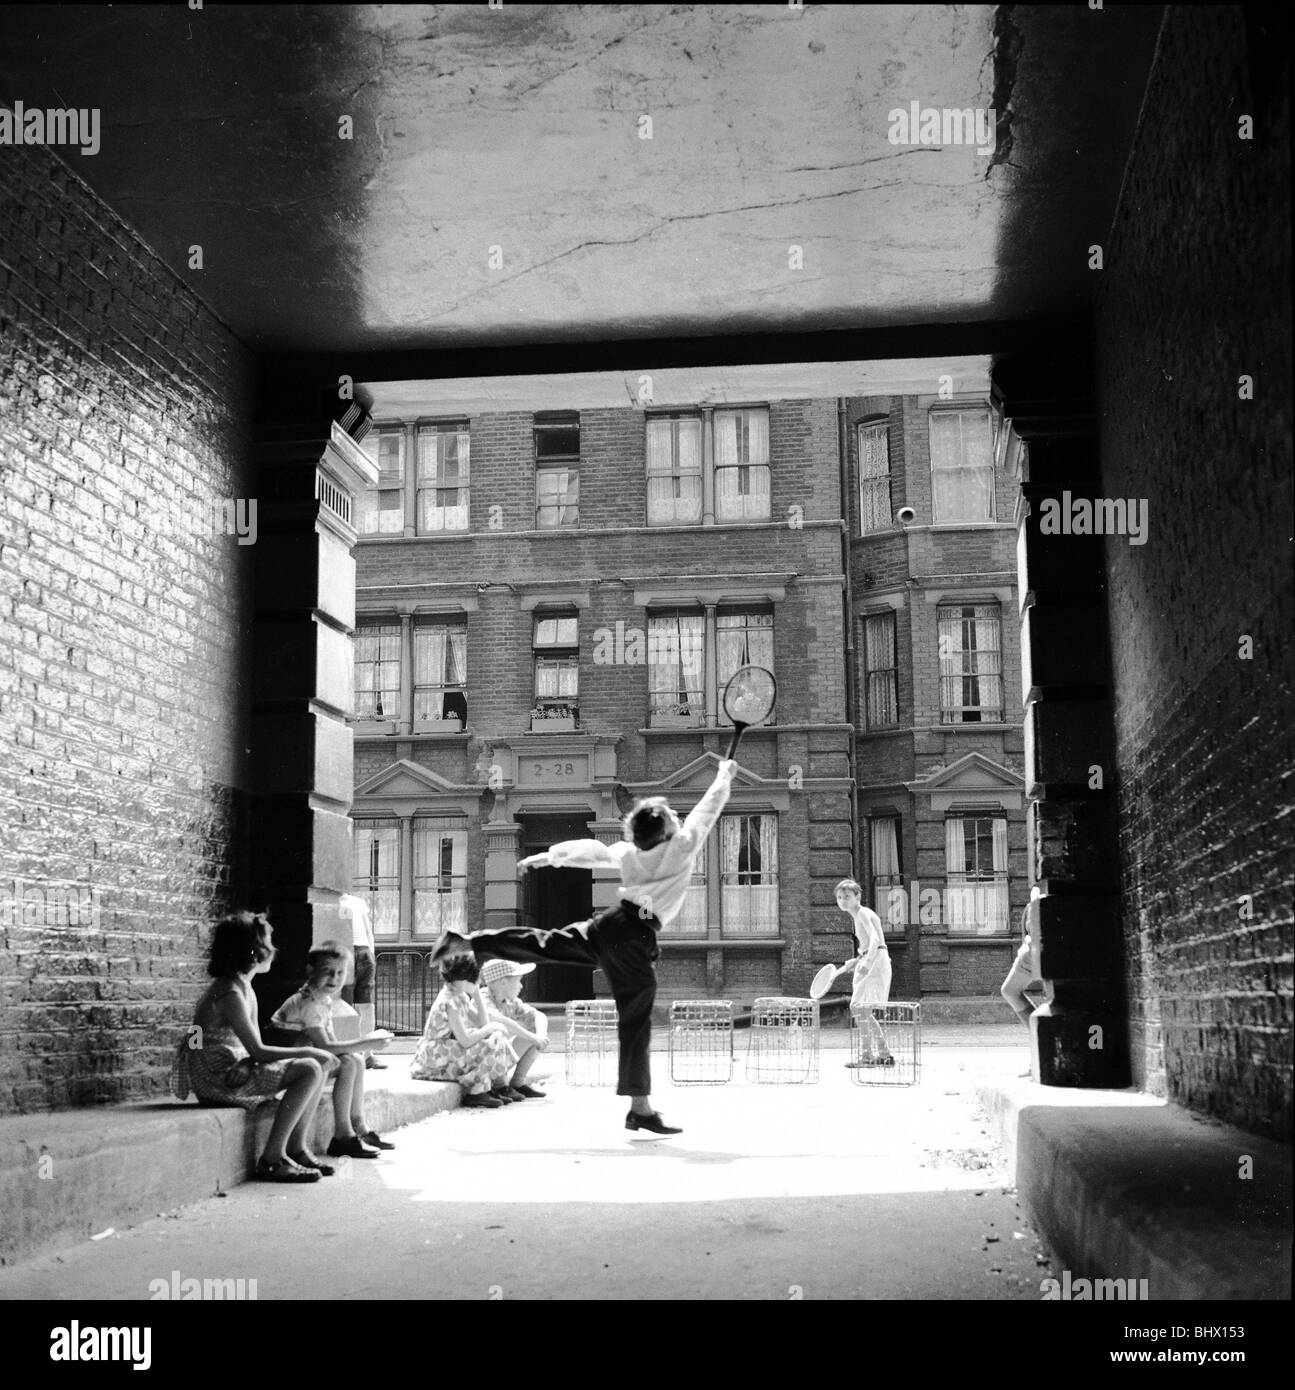 Inspired by the Wimbledon tennis championships taking place, these children enjoy a game of tennis in the back streets around Stock Photo